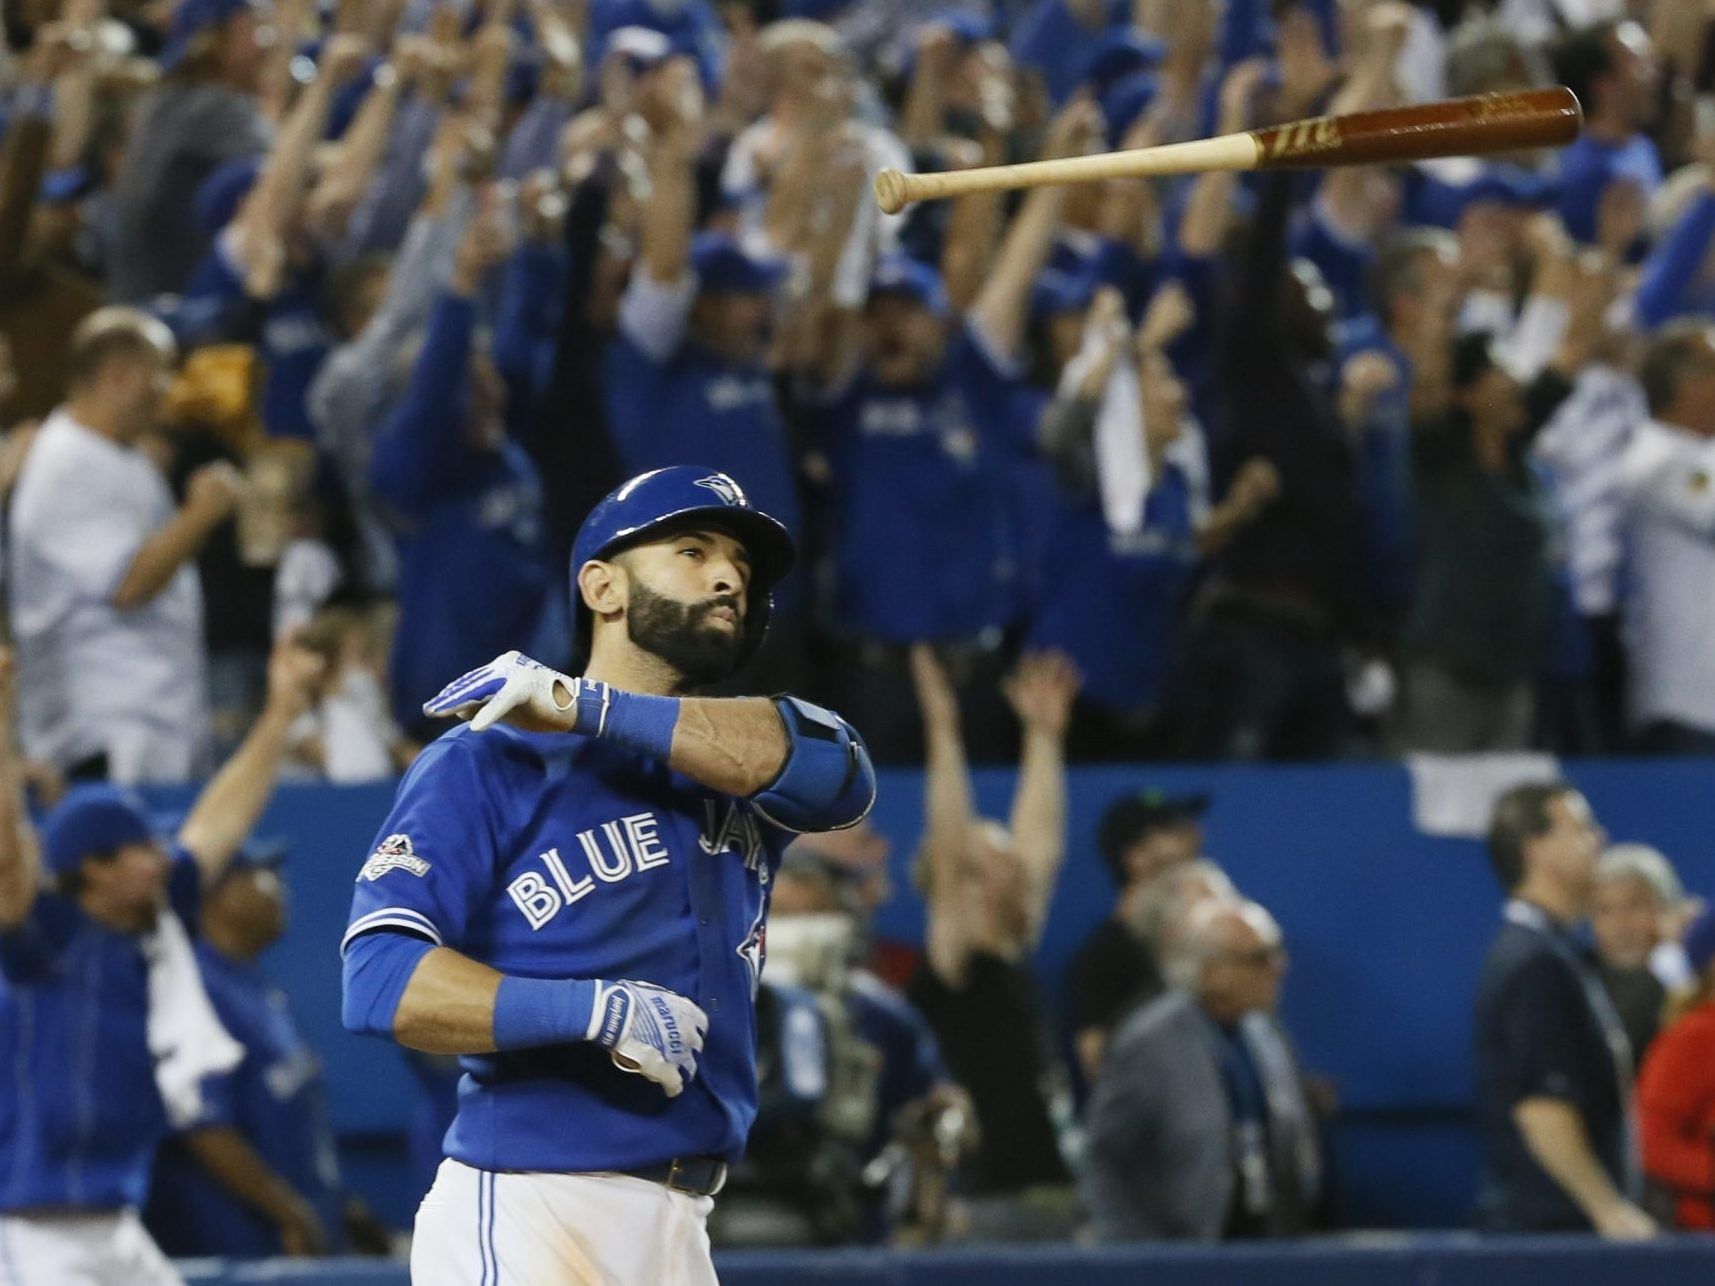 Jose Bautista signs 1-year deal with Mets